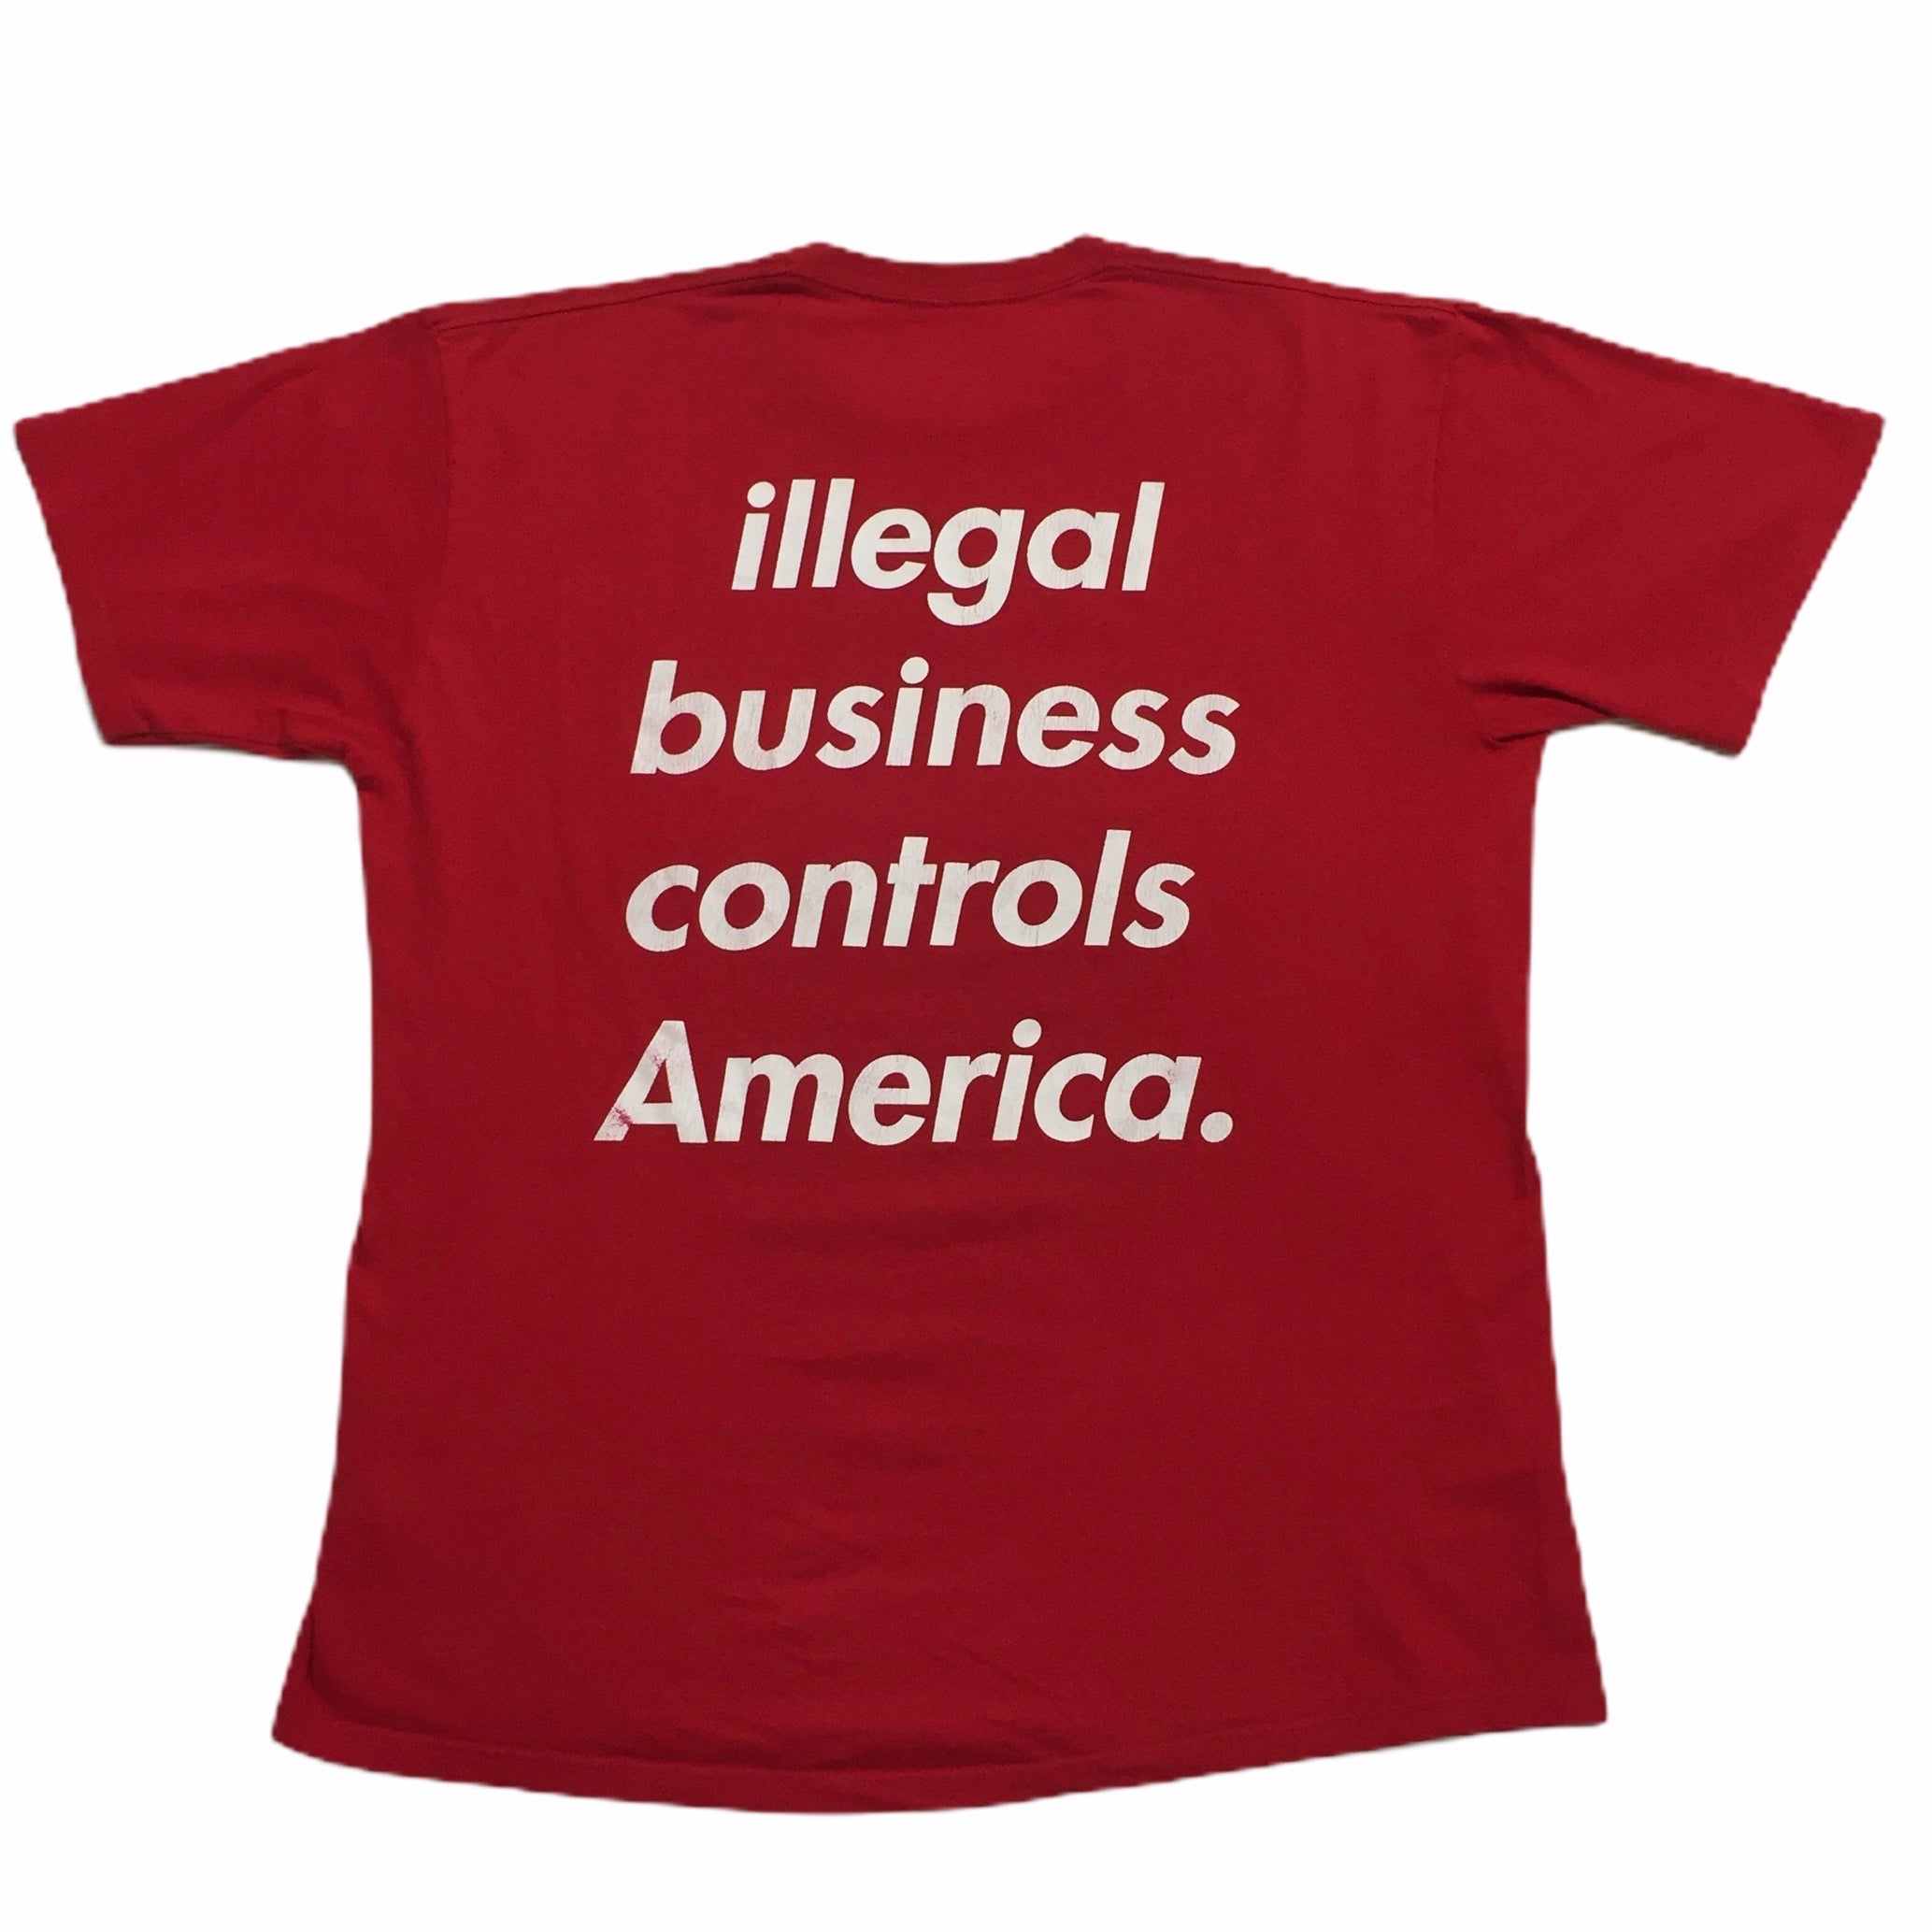 2005 Supreme Illegal Business Controls America Red Tee